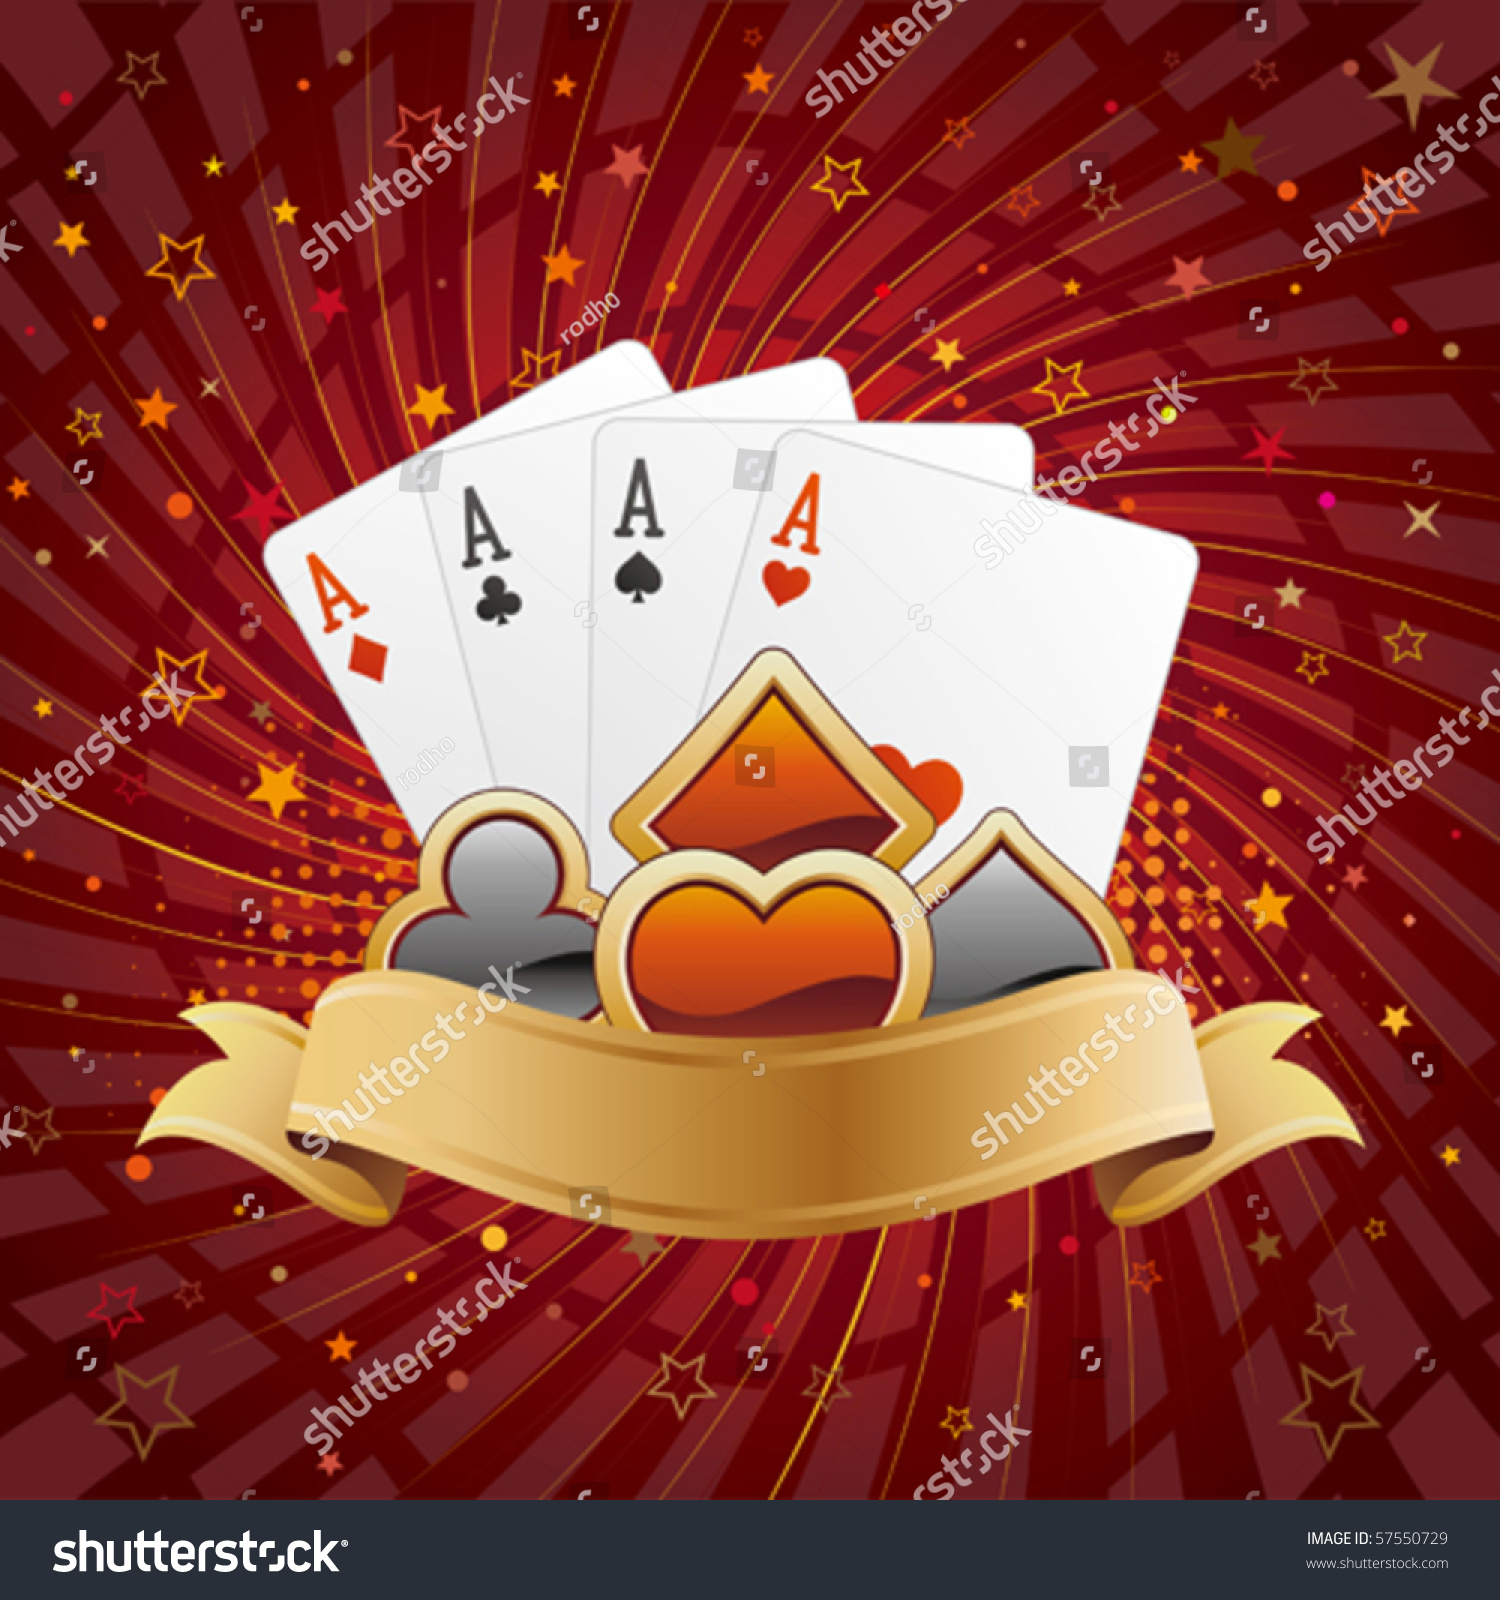 Casino Design Elements,Abstract Background Stock Vector Illustration ...